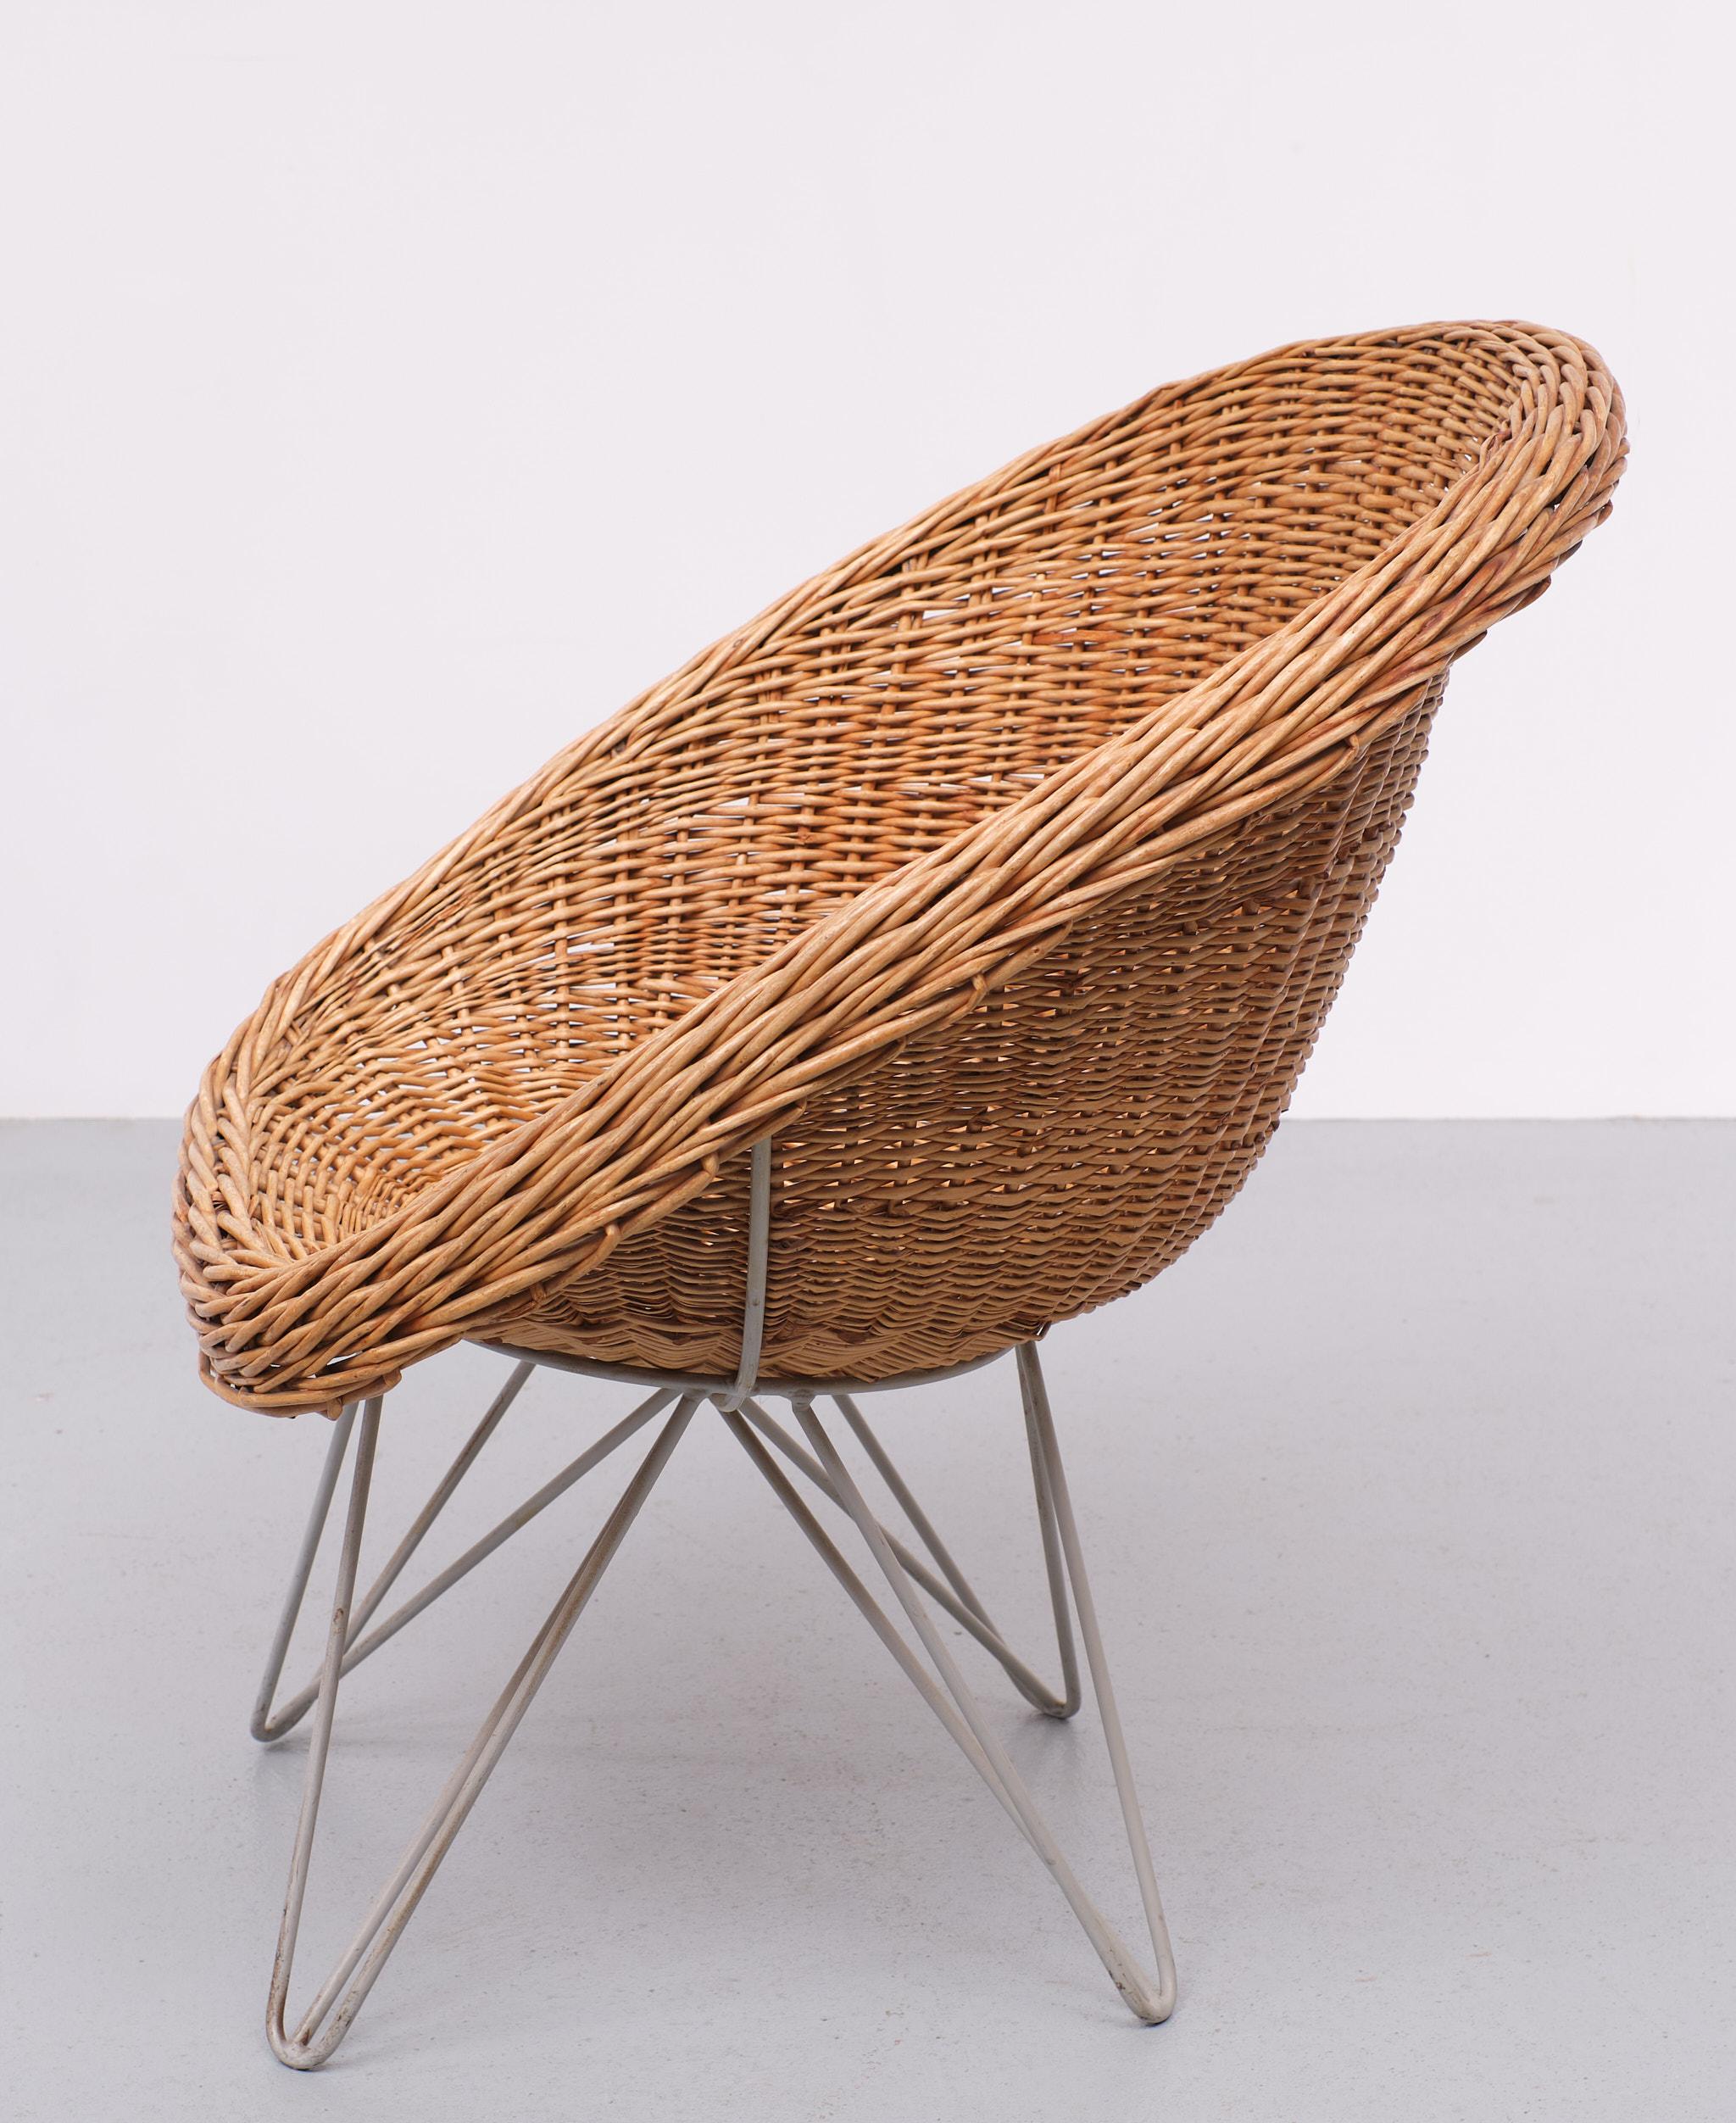 Mid-20th Century Wicker chair  Design Teun Velthuizen for  Urotan  1950s Holland  For Sale